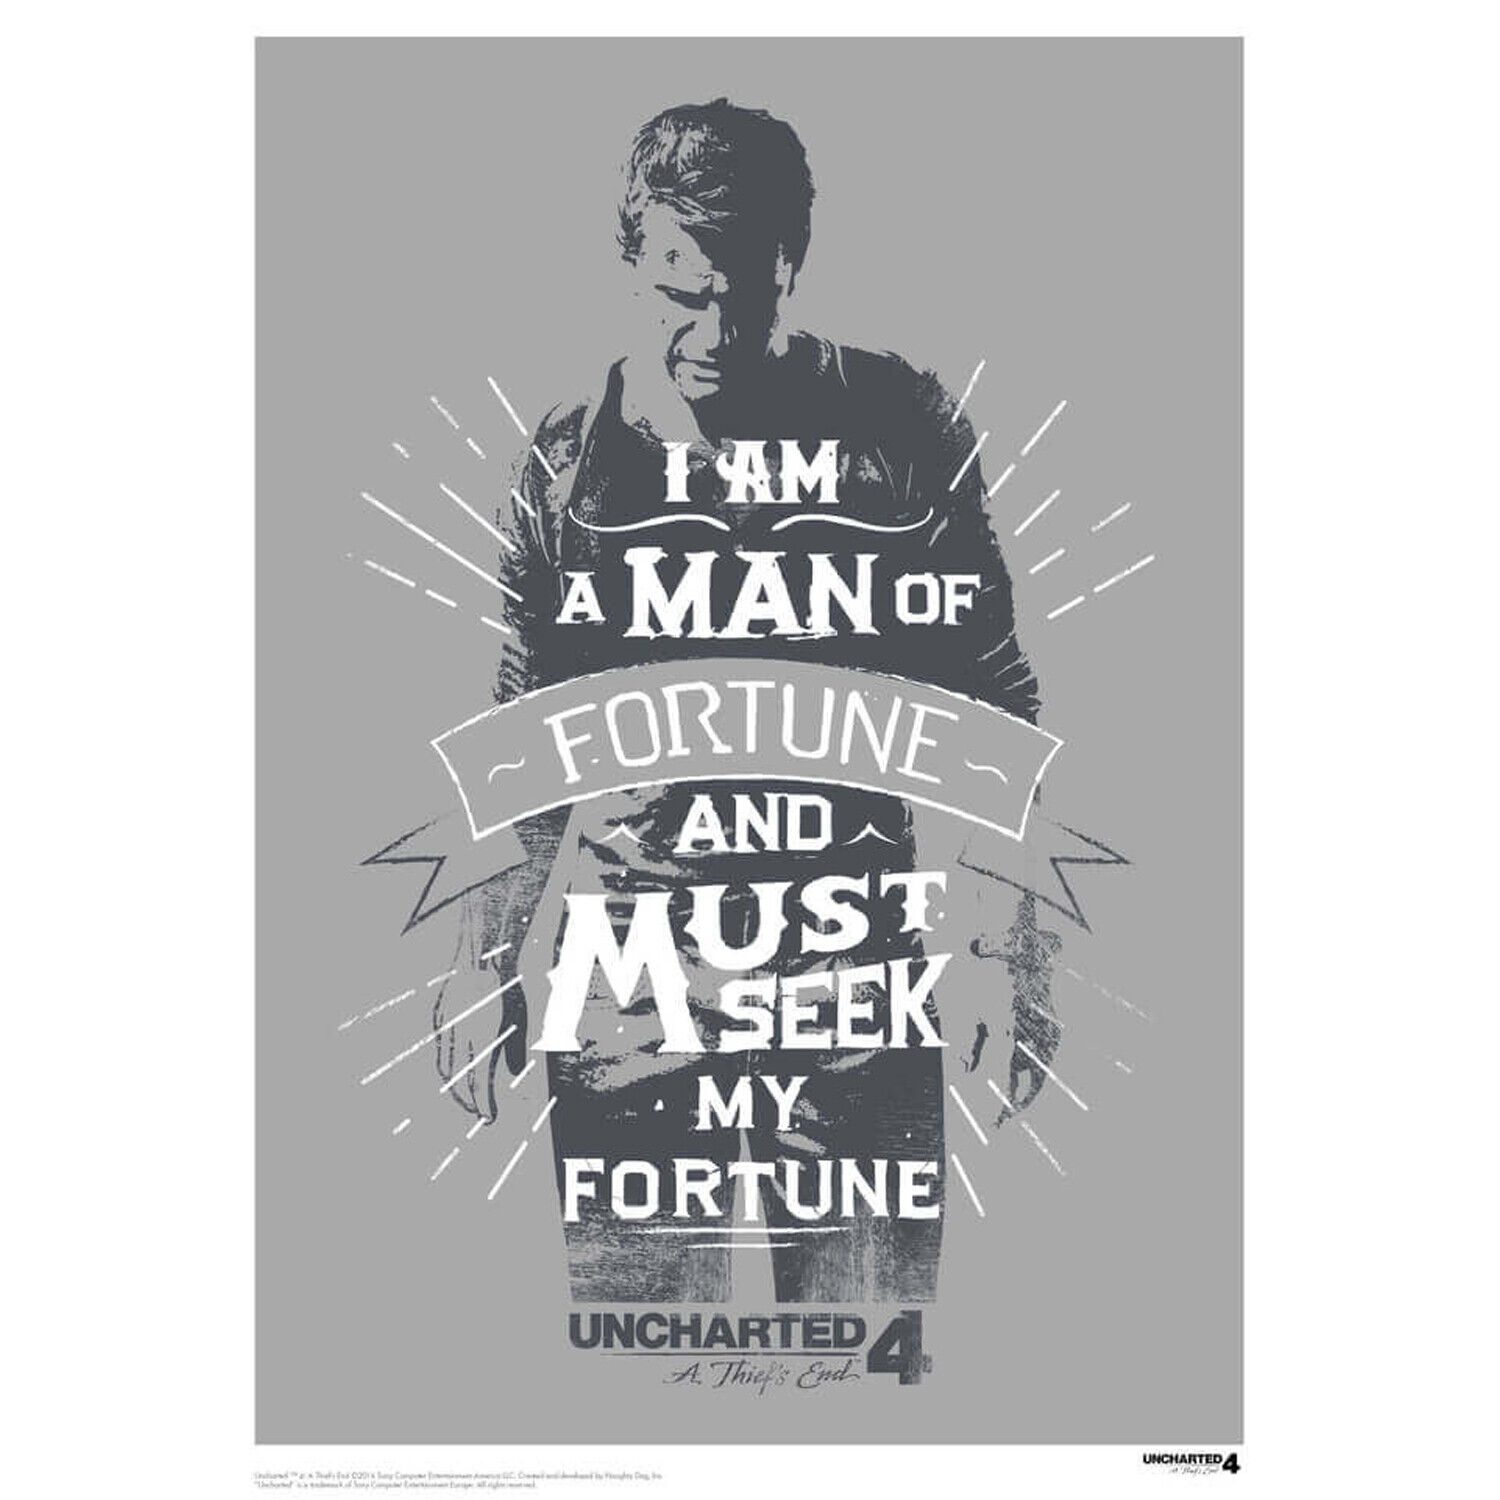 Uncharted 4 Exclusive Art Print - Limited to 995 Worldwide